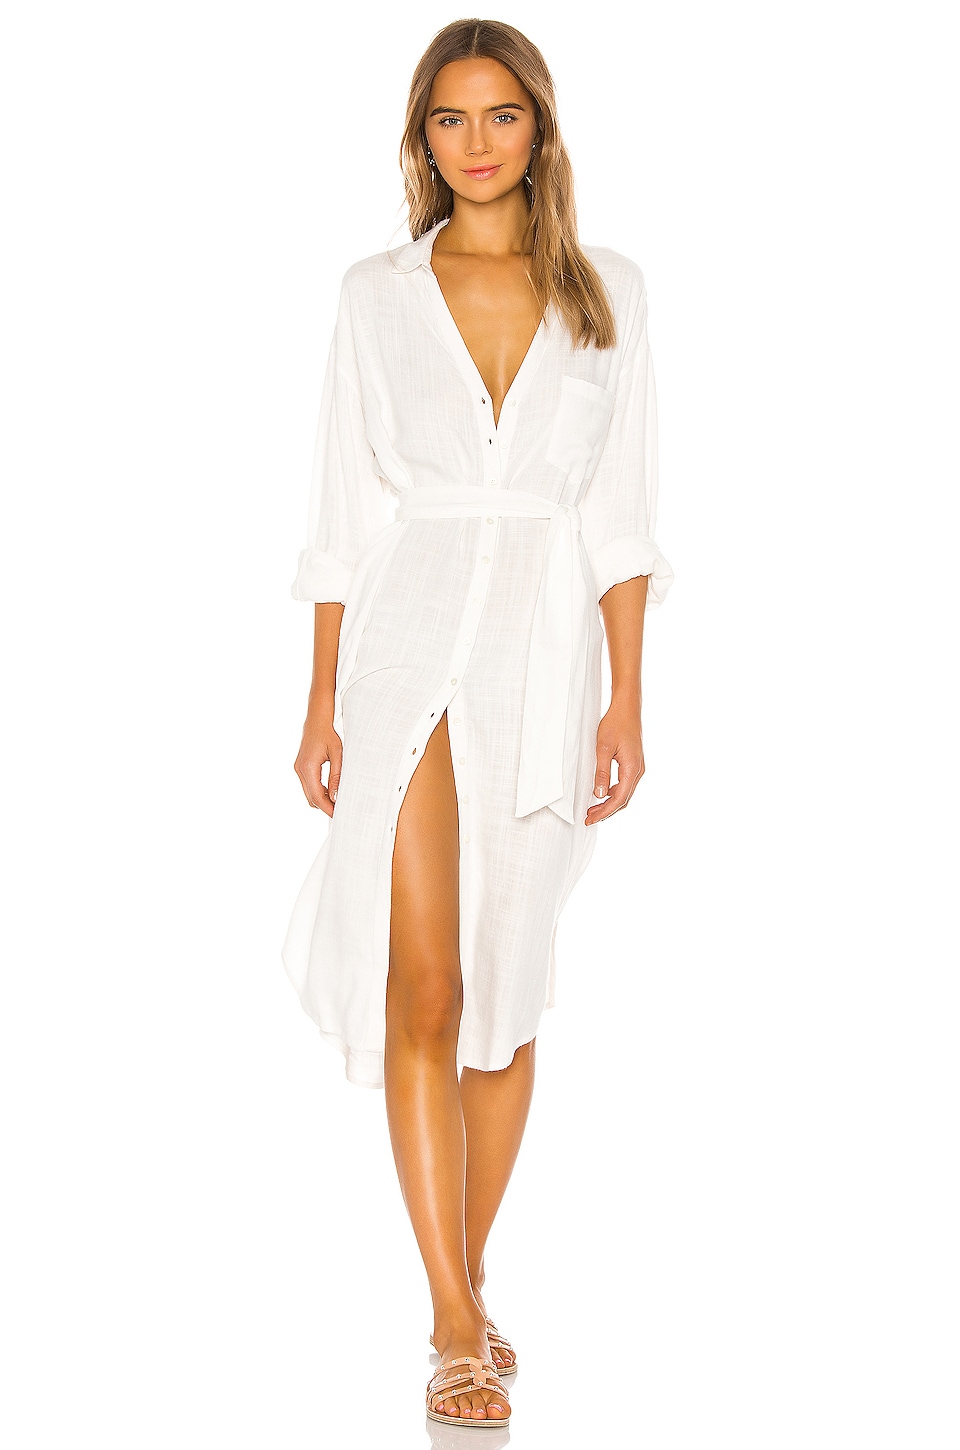 Cute White Beach Cover Up Dress with Buttons for Hawaii Vacation Outift